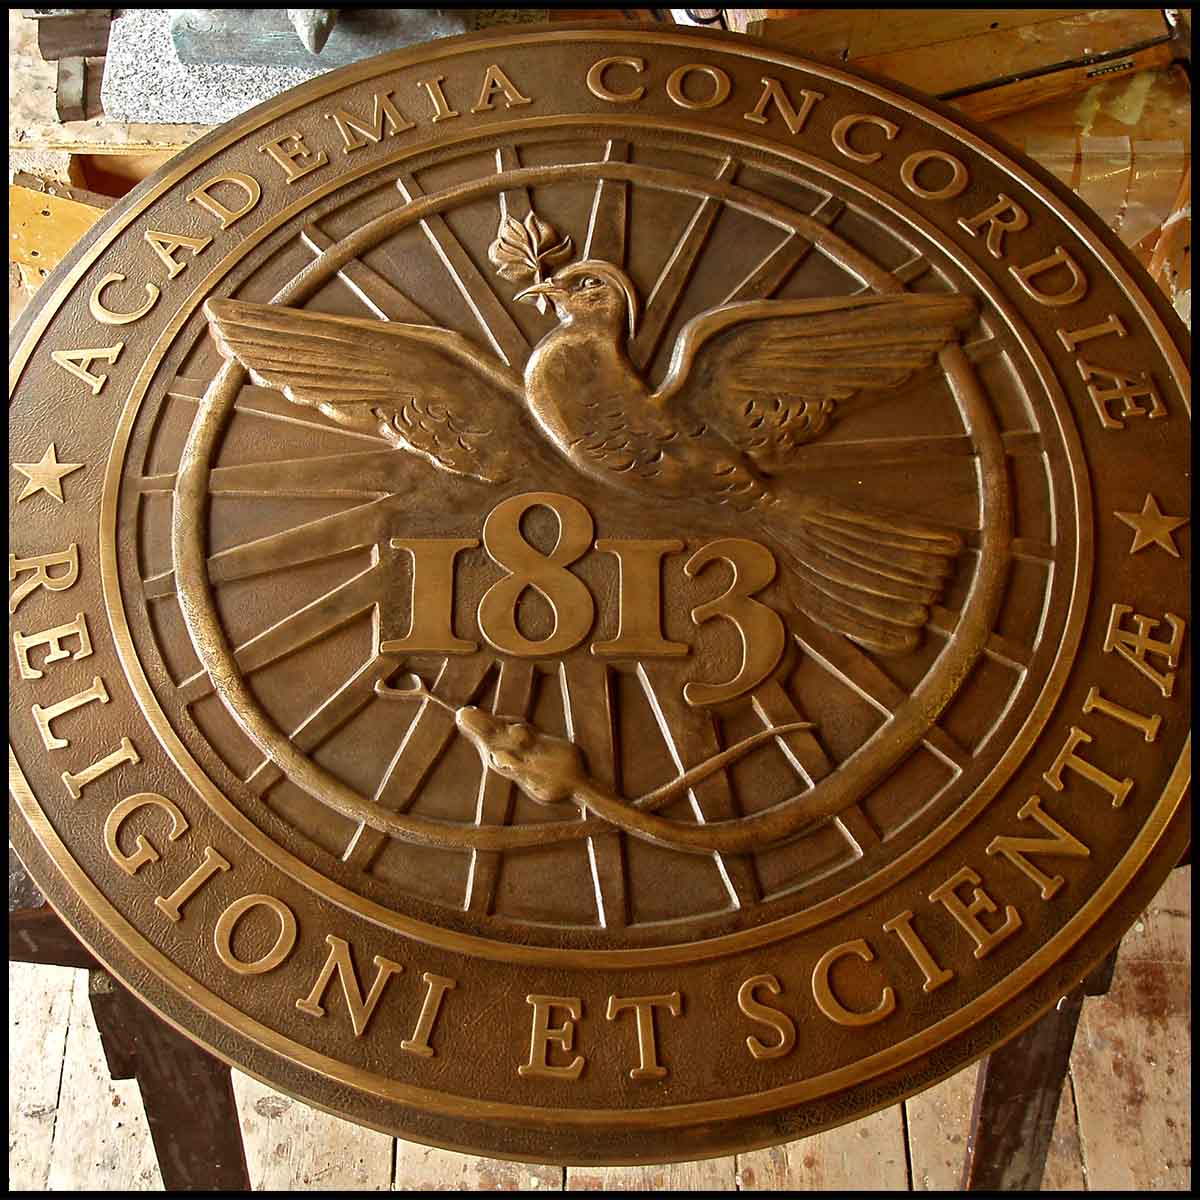 photo of bronze-colored sculpted relief of Kimball Union Academy seal featuring bird, snake, and Latin text in sculptor's studio